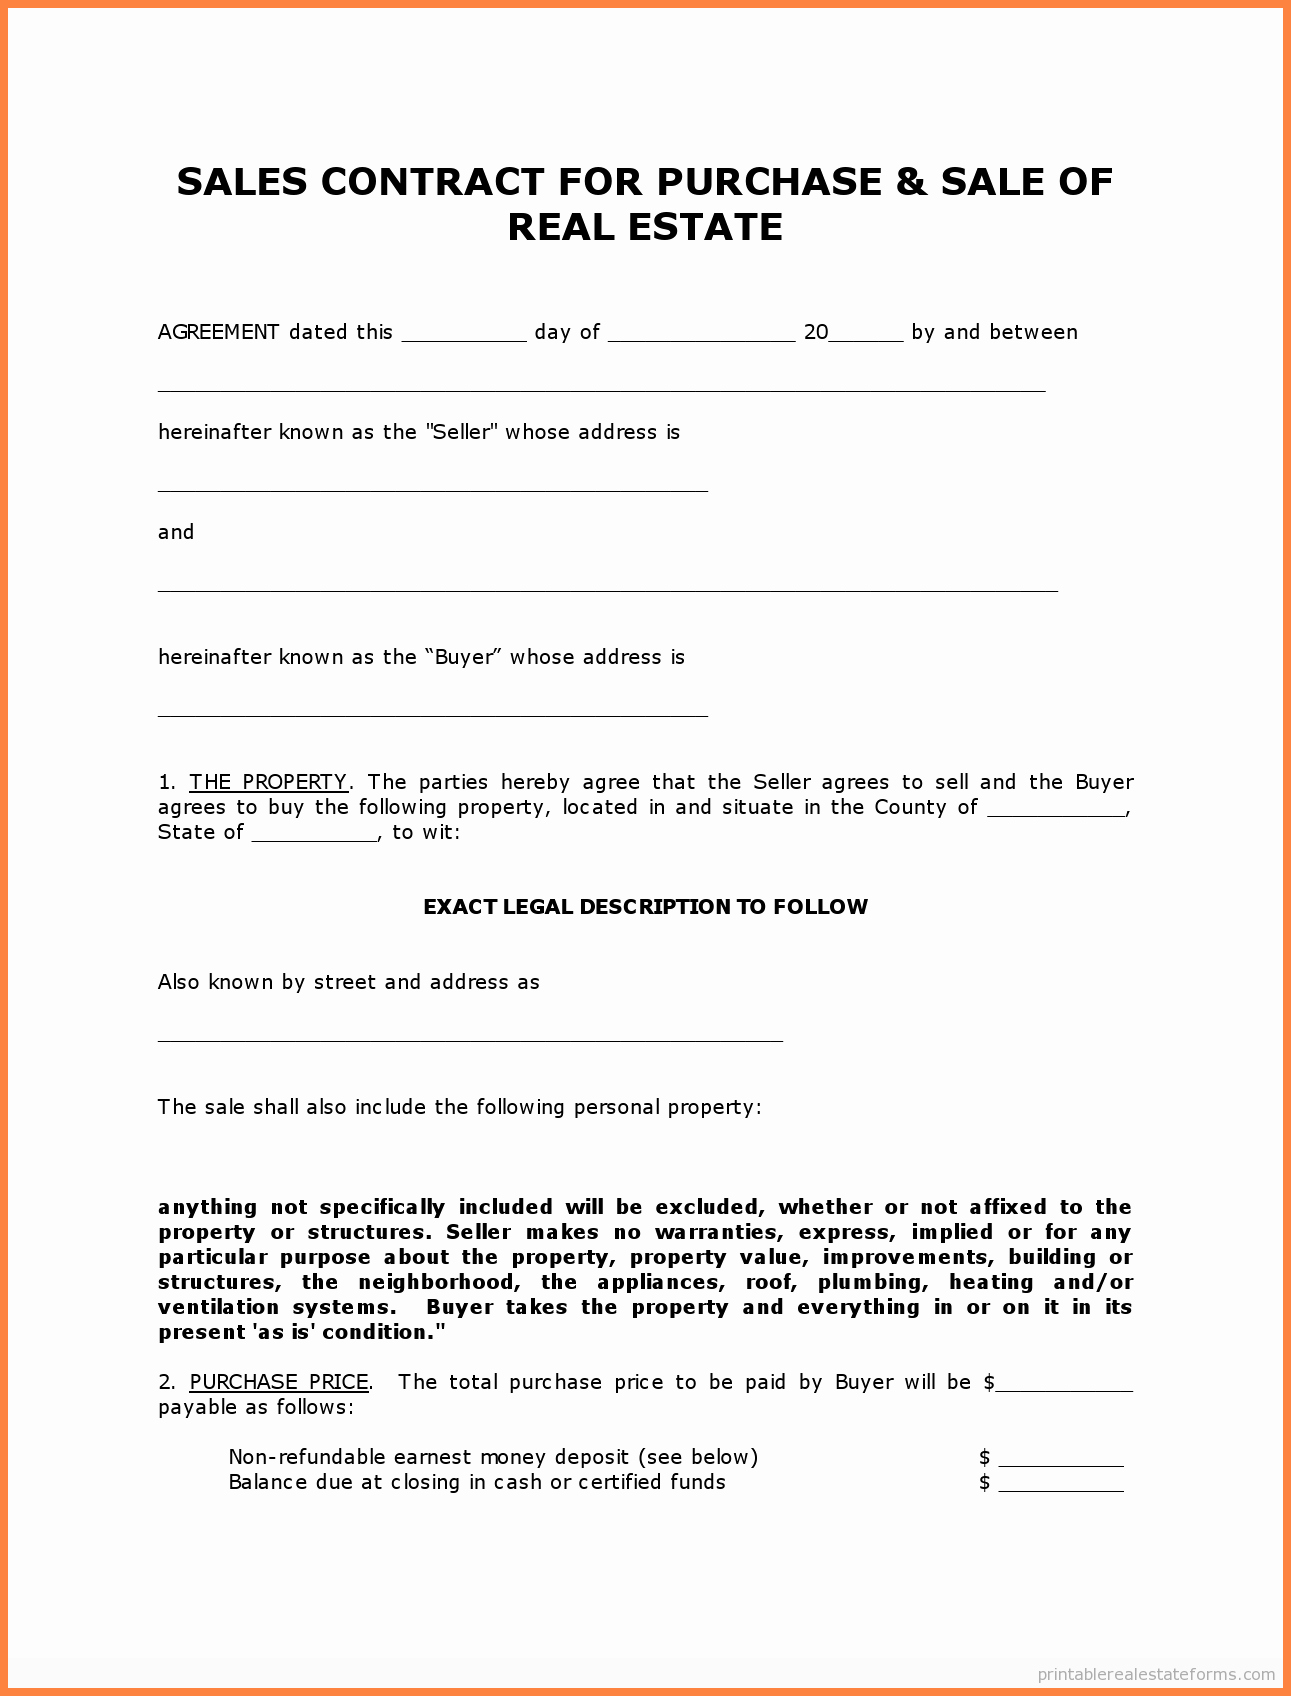 Land Purchase Agreement form Pdf Lovely 4 for Sale by Owner Purchase Agreement form